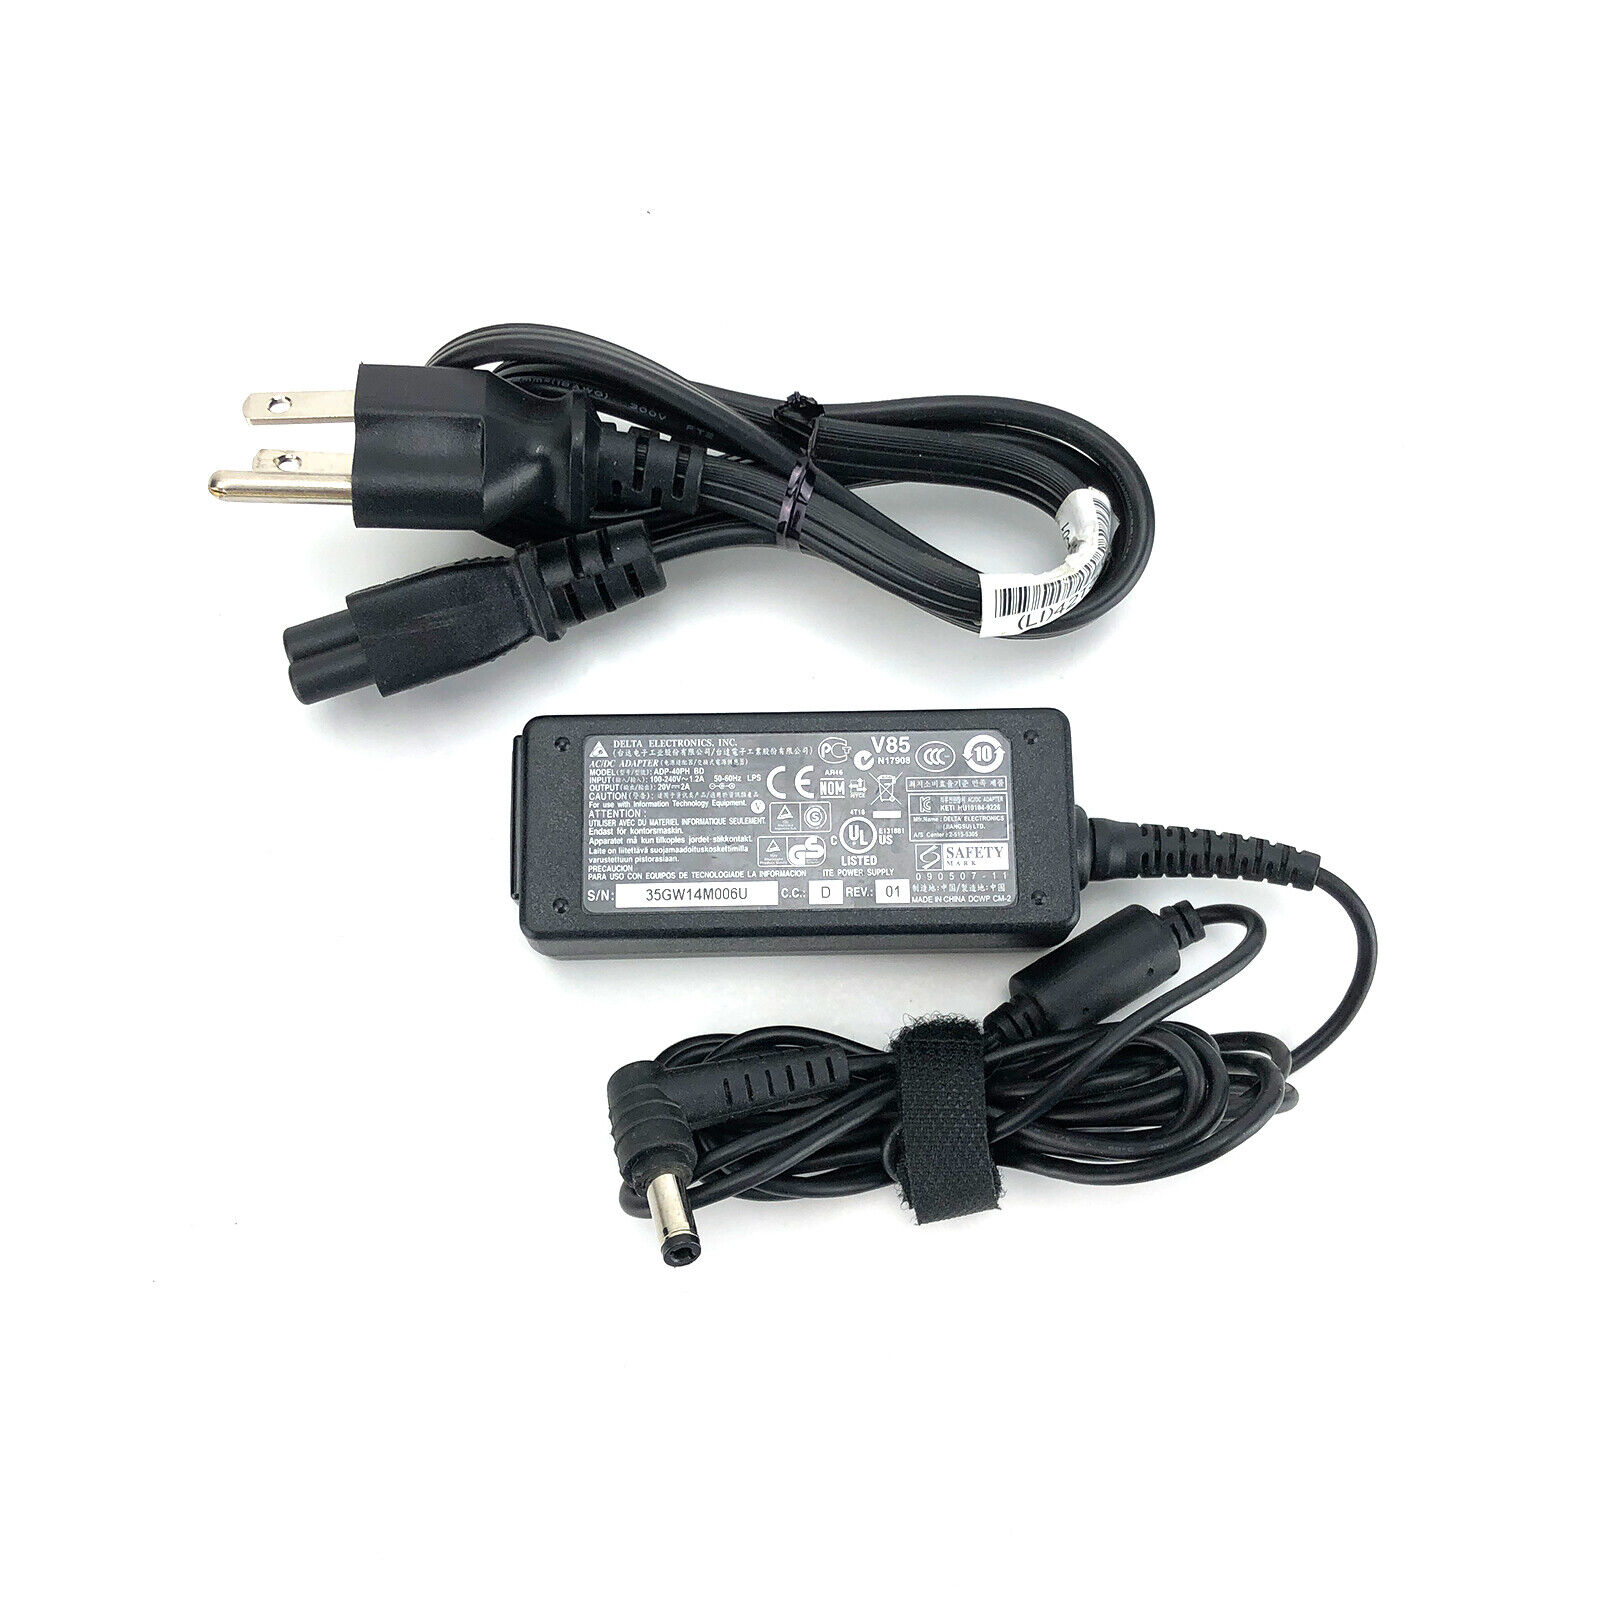 Genuine Delta ADP-40PH BD AC Power Adapter Laptop MSI computers W/Cord